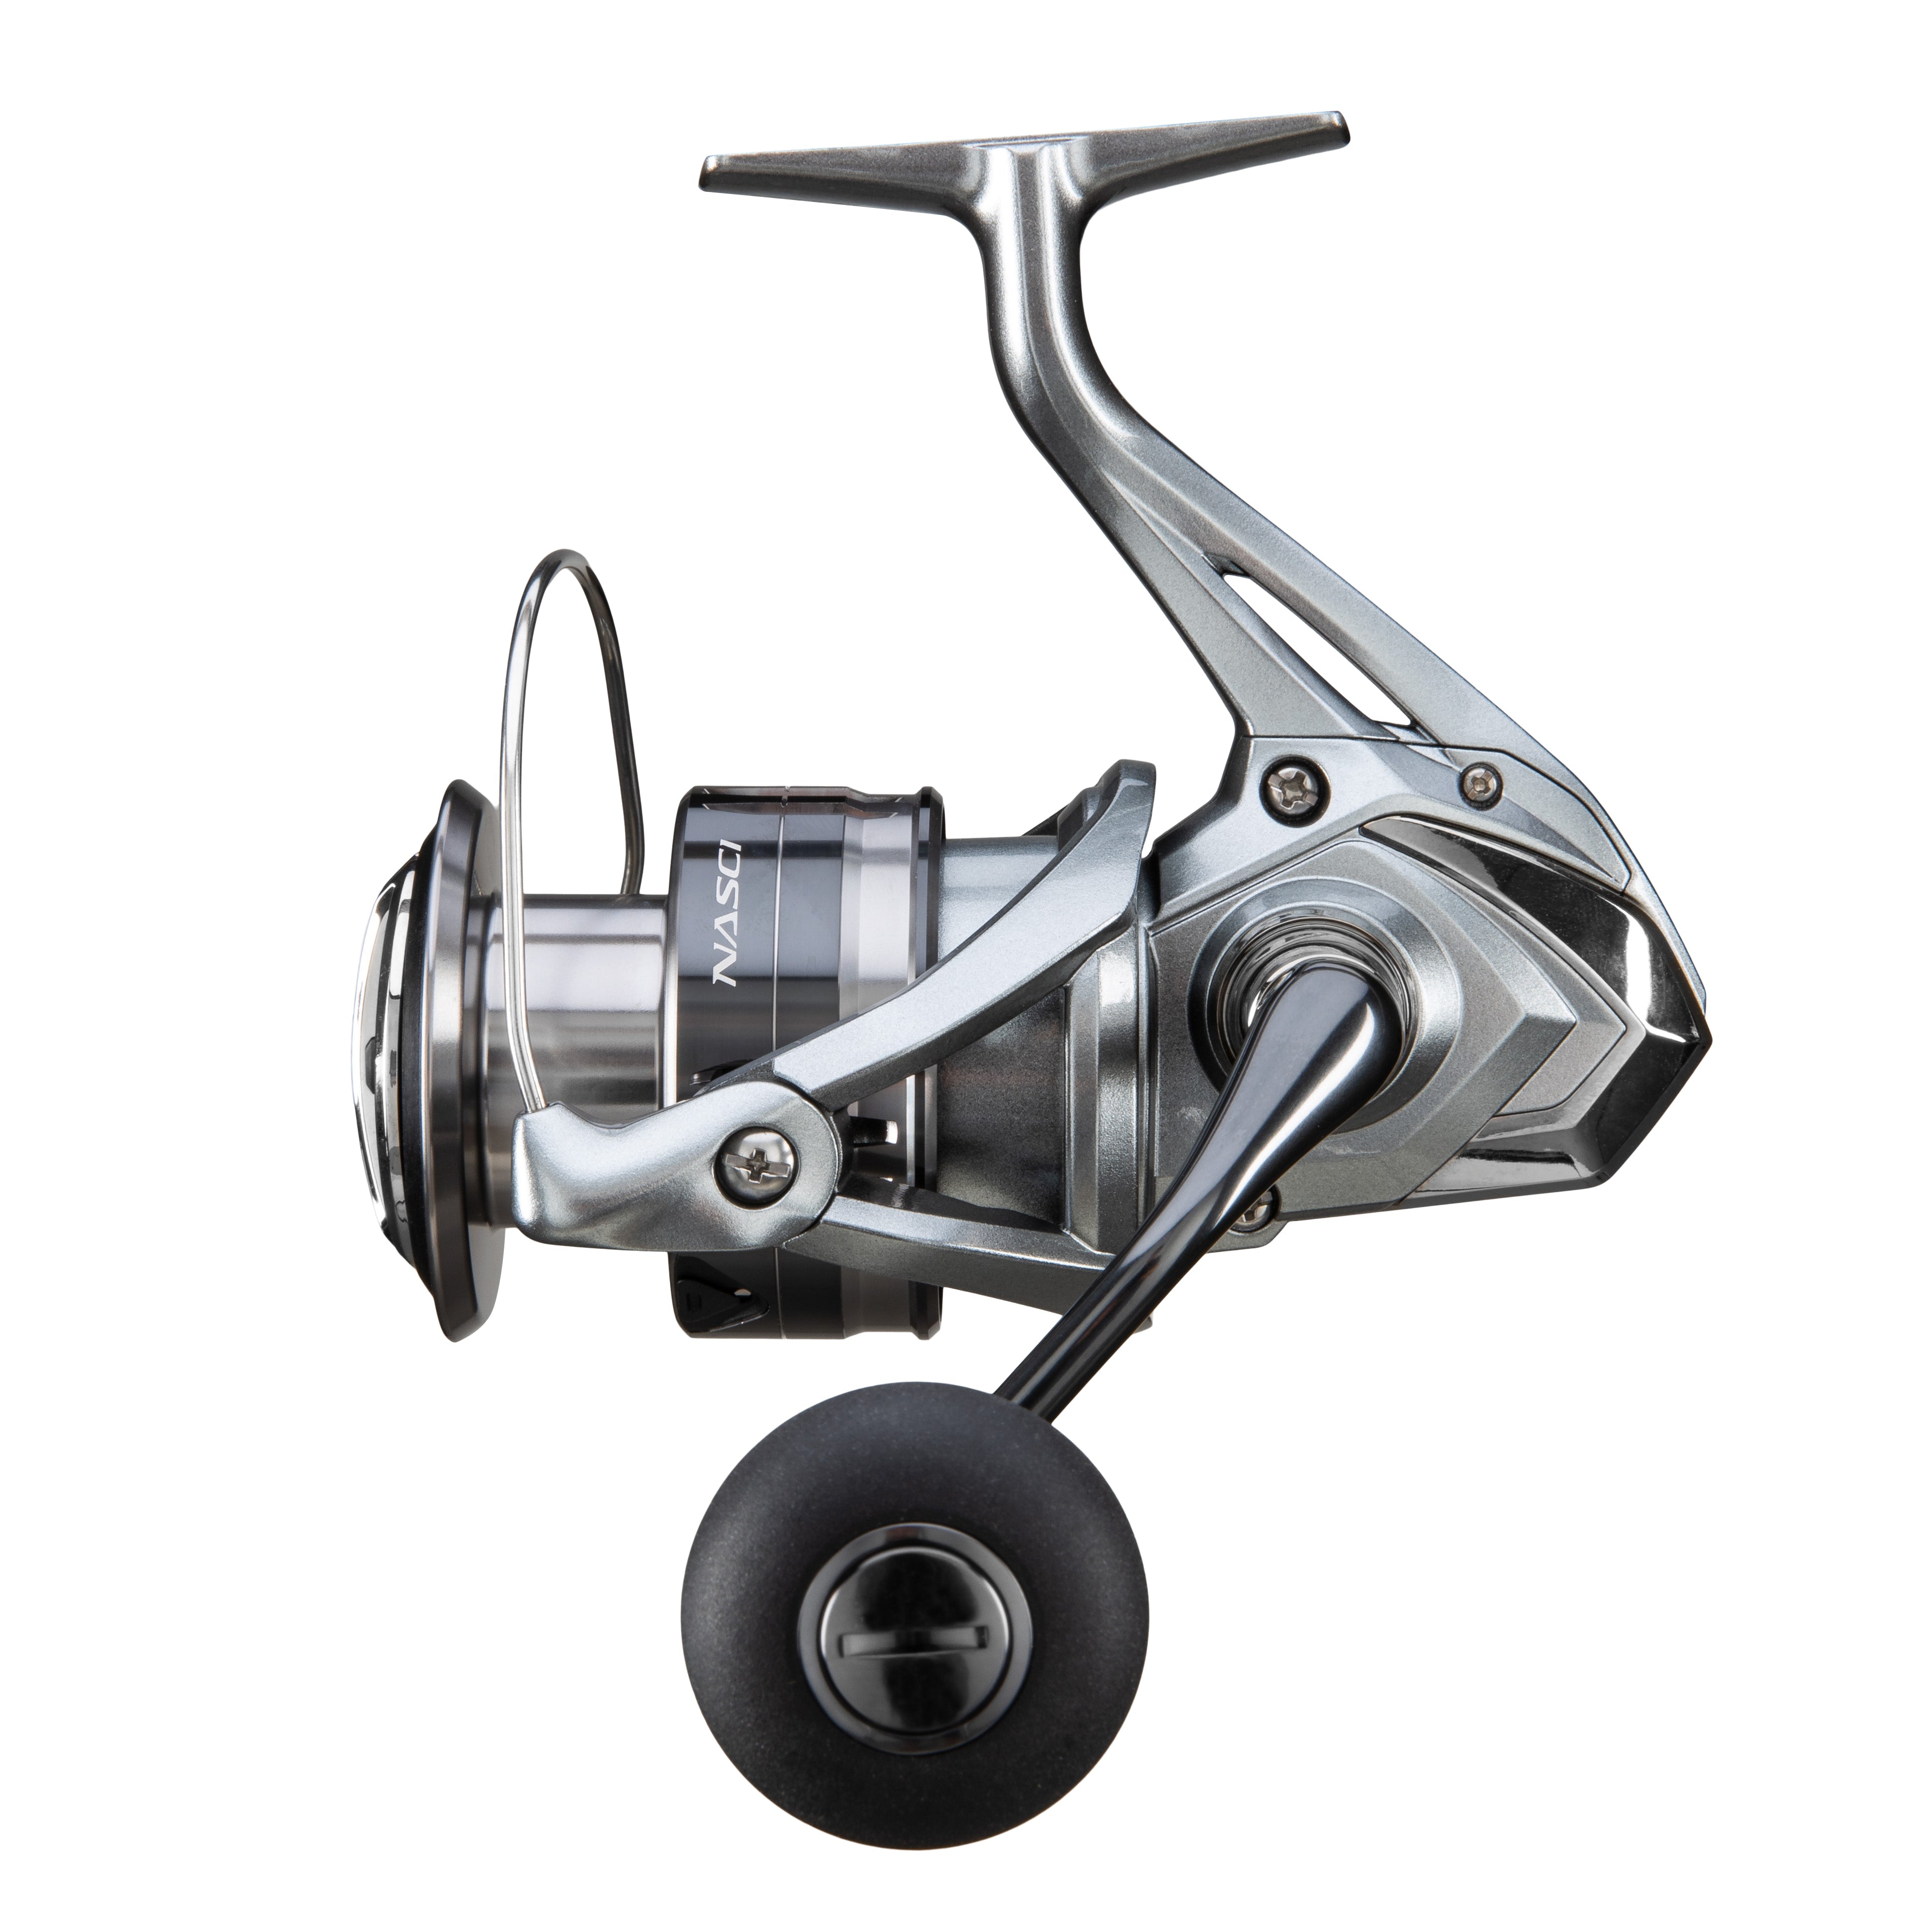 Diamond Fury 150 reel parts, Another Spin on Glass